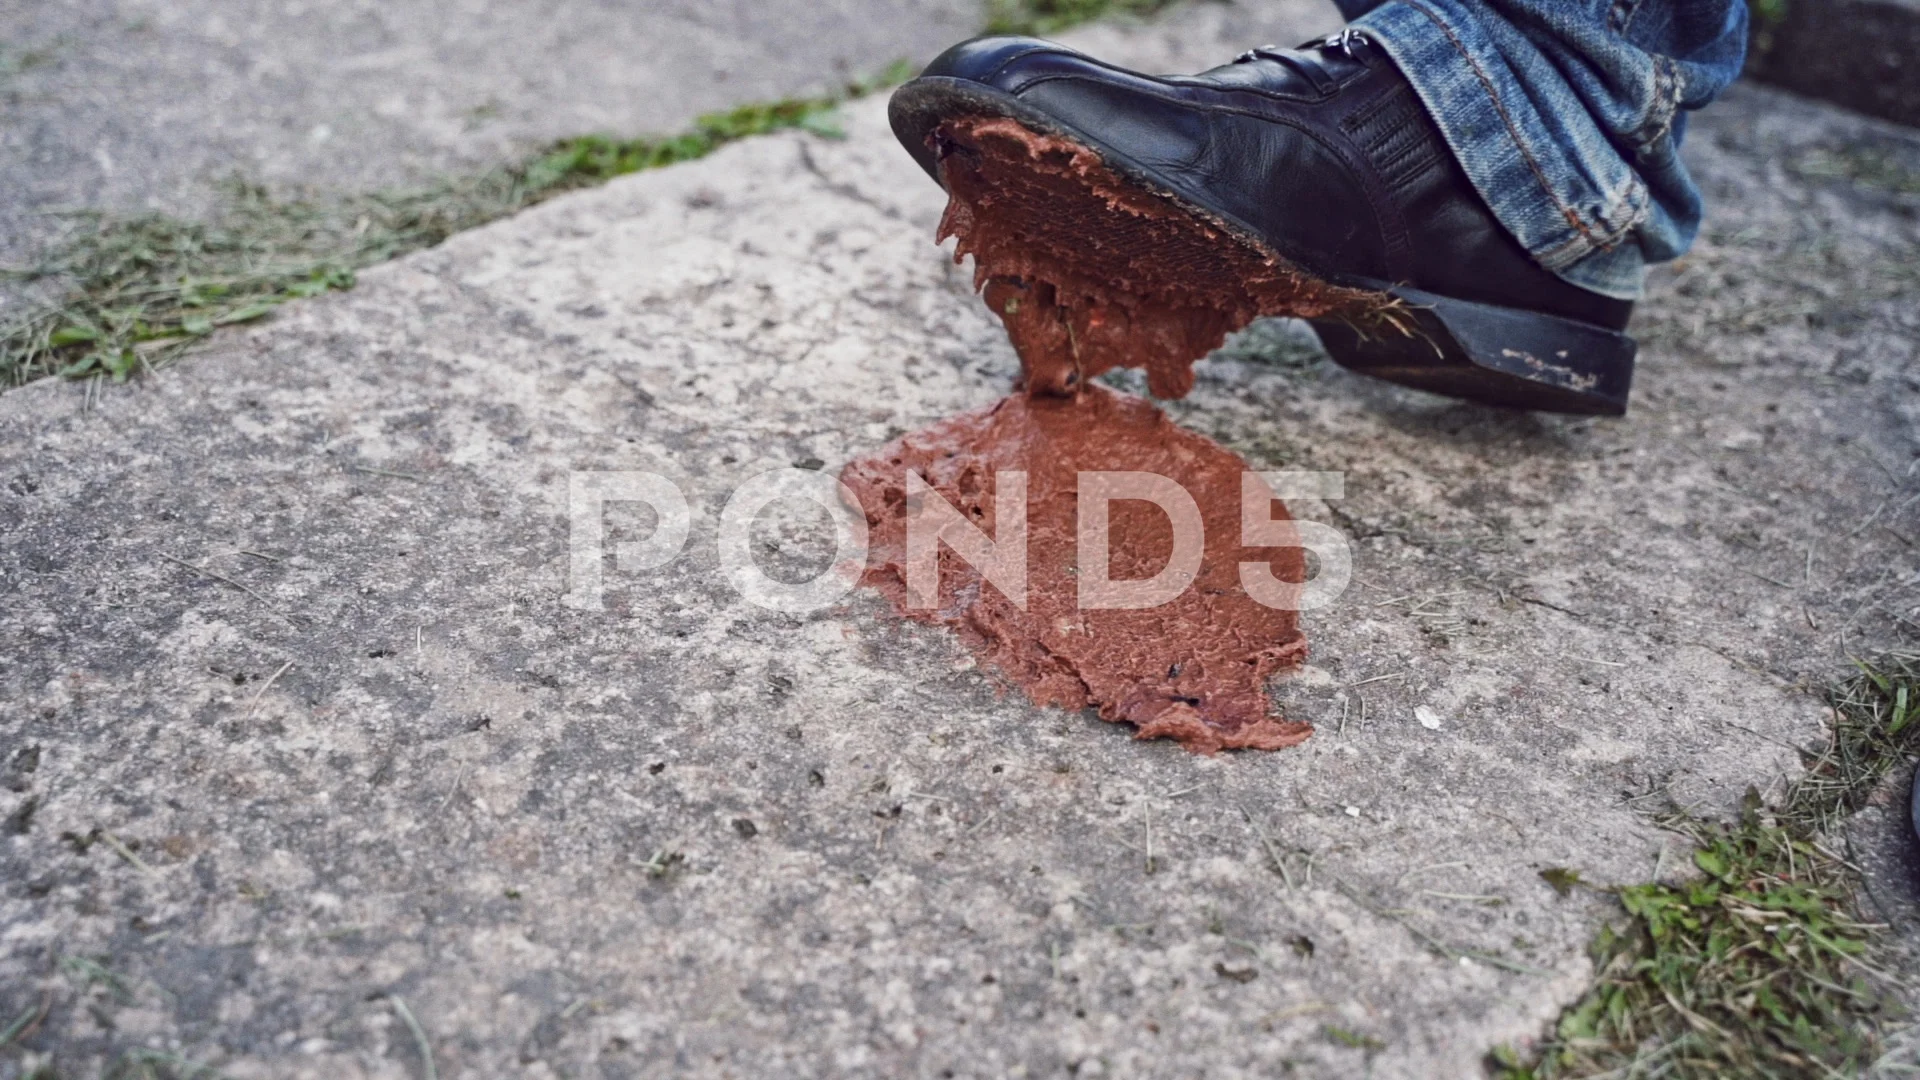 How To Cleen Dog Poop Of Shoes